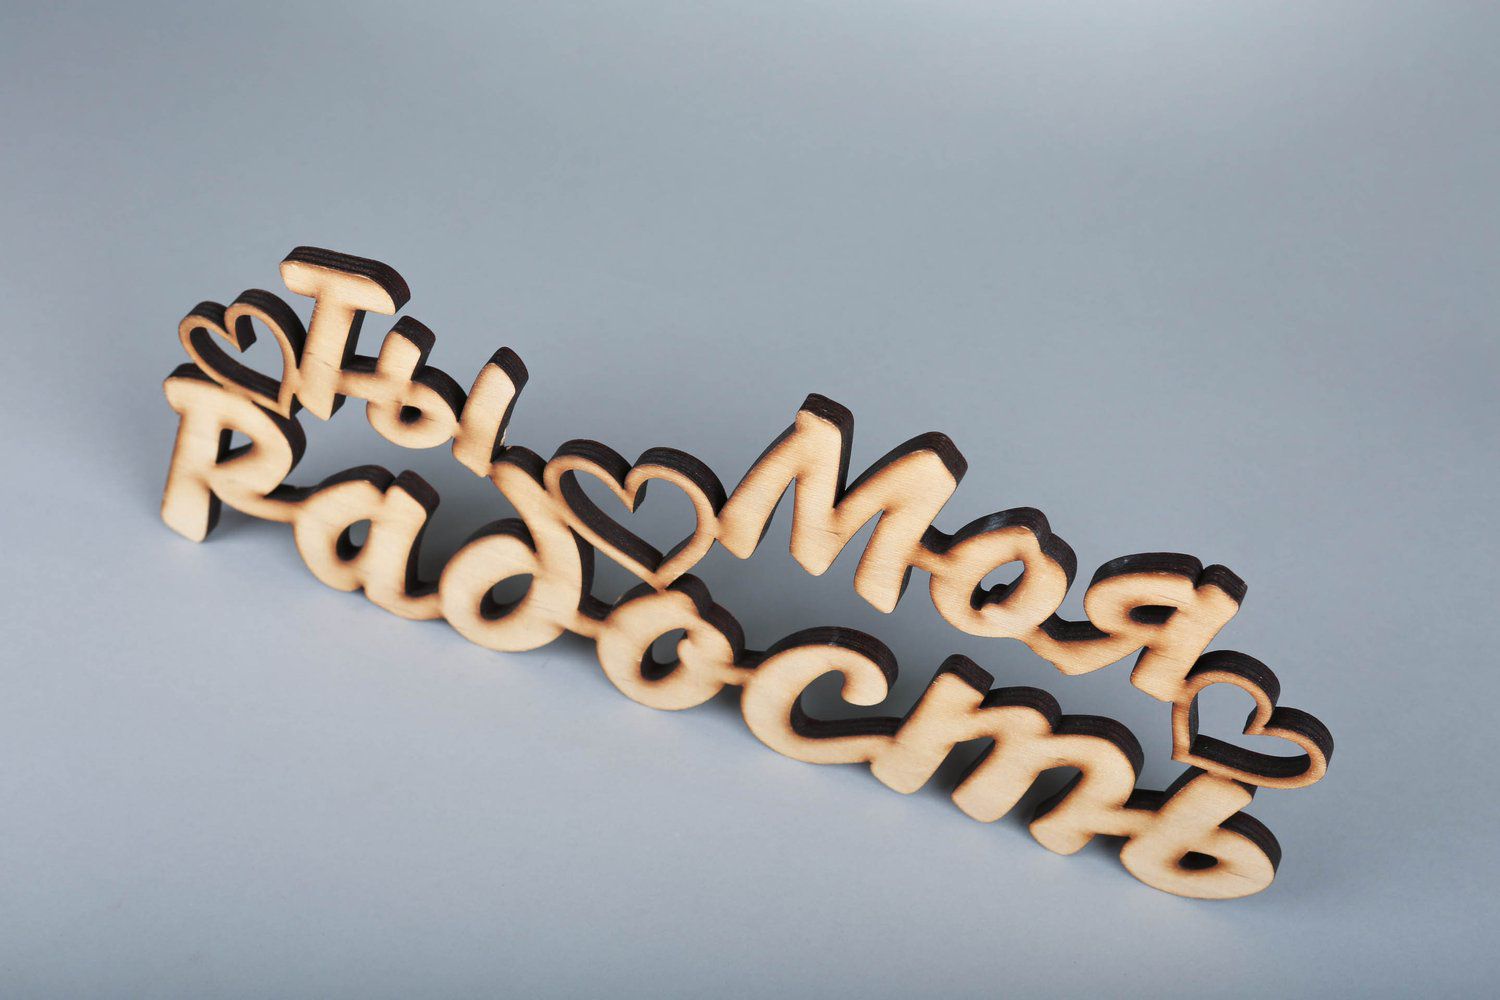 Chipboard-lettering made of plywood Ты моя радость photo 2